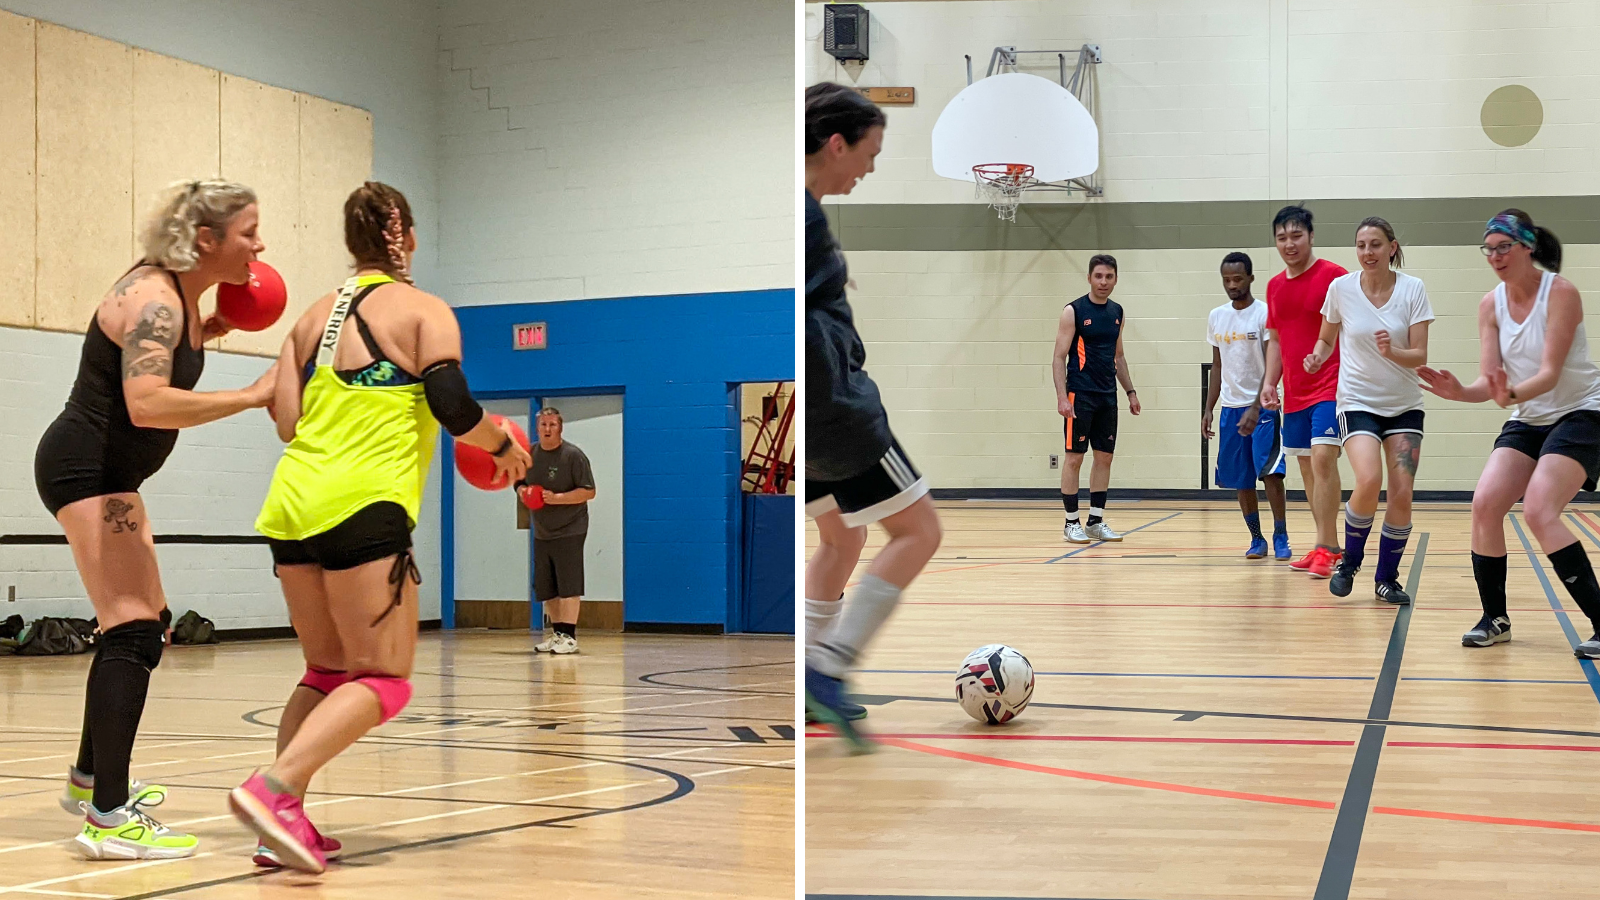 A split photo with two people playing dodgeball on the left and a group of people playing soccer on the right.